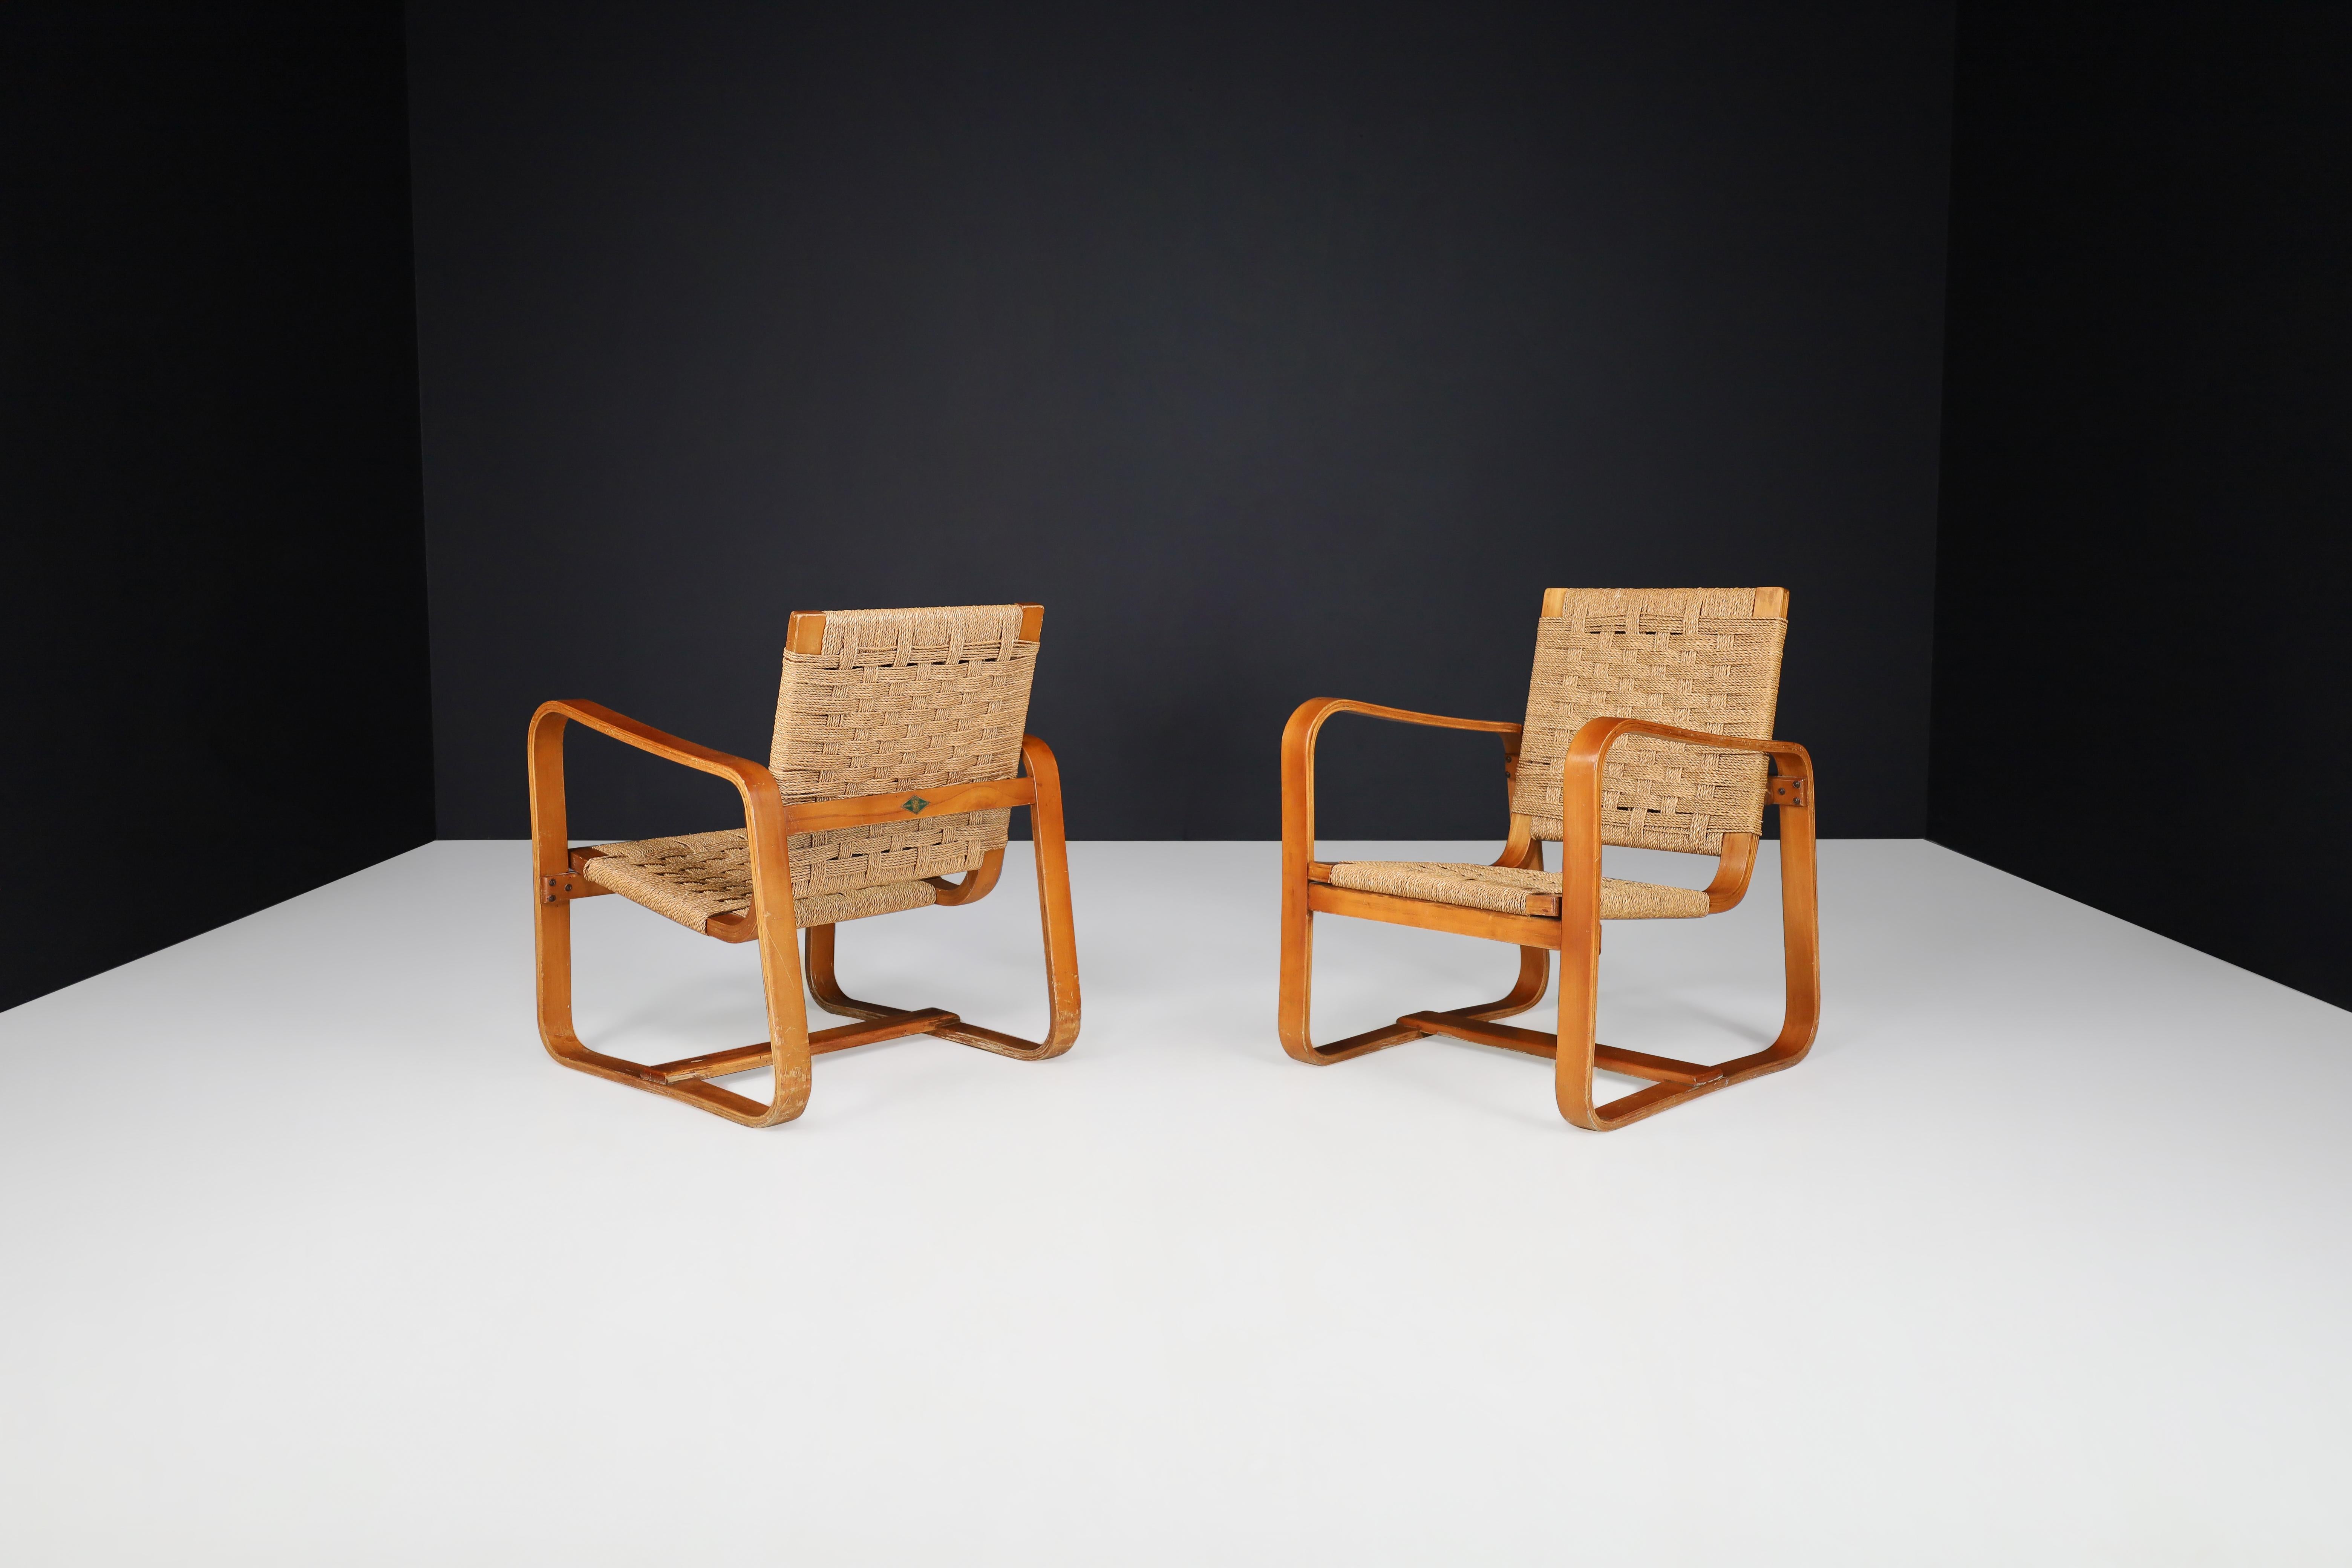 Rope Giuseppe Pagano Pogatschnig. 'Bocconi' Armchairs, Italy, 1940s For Sale